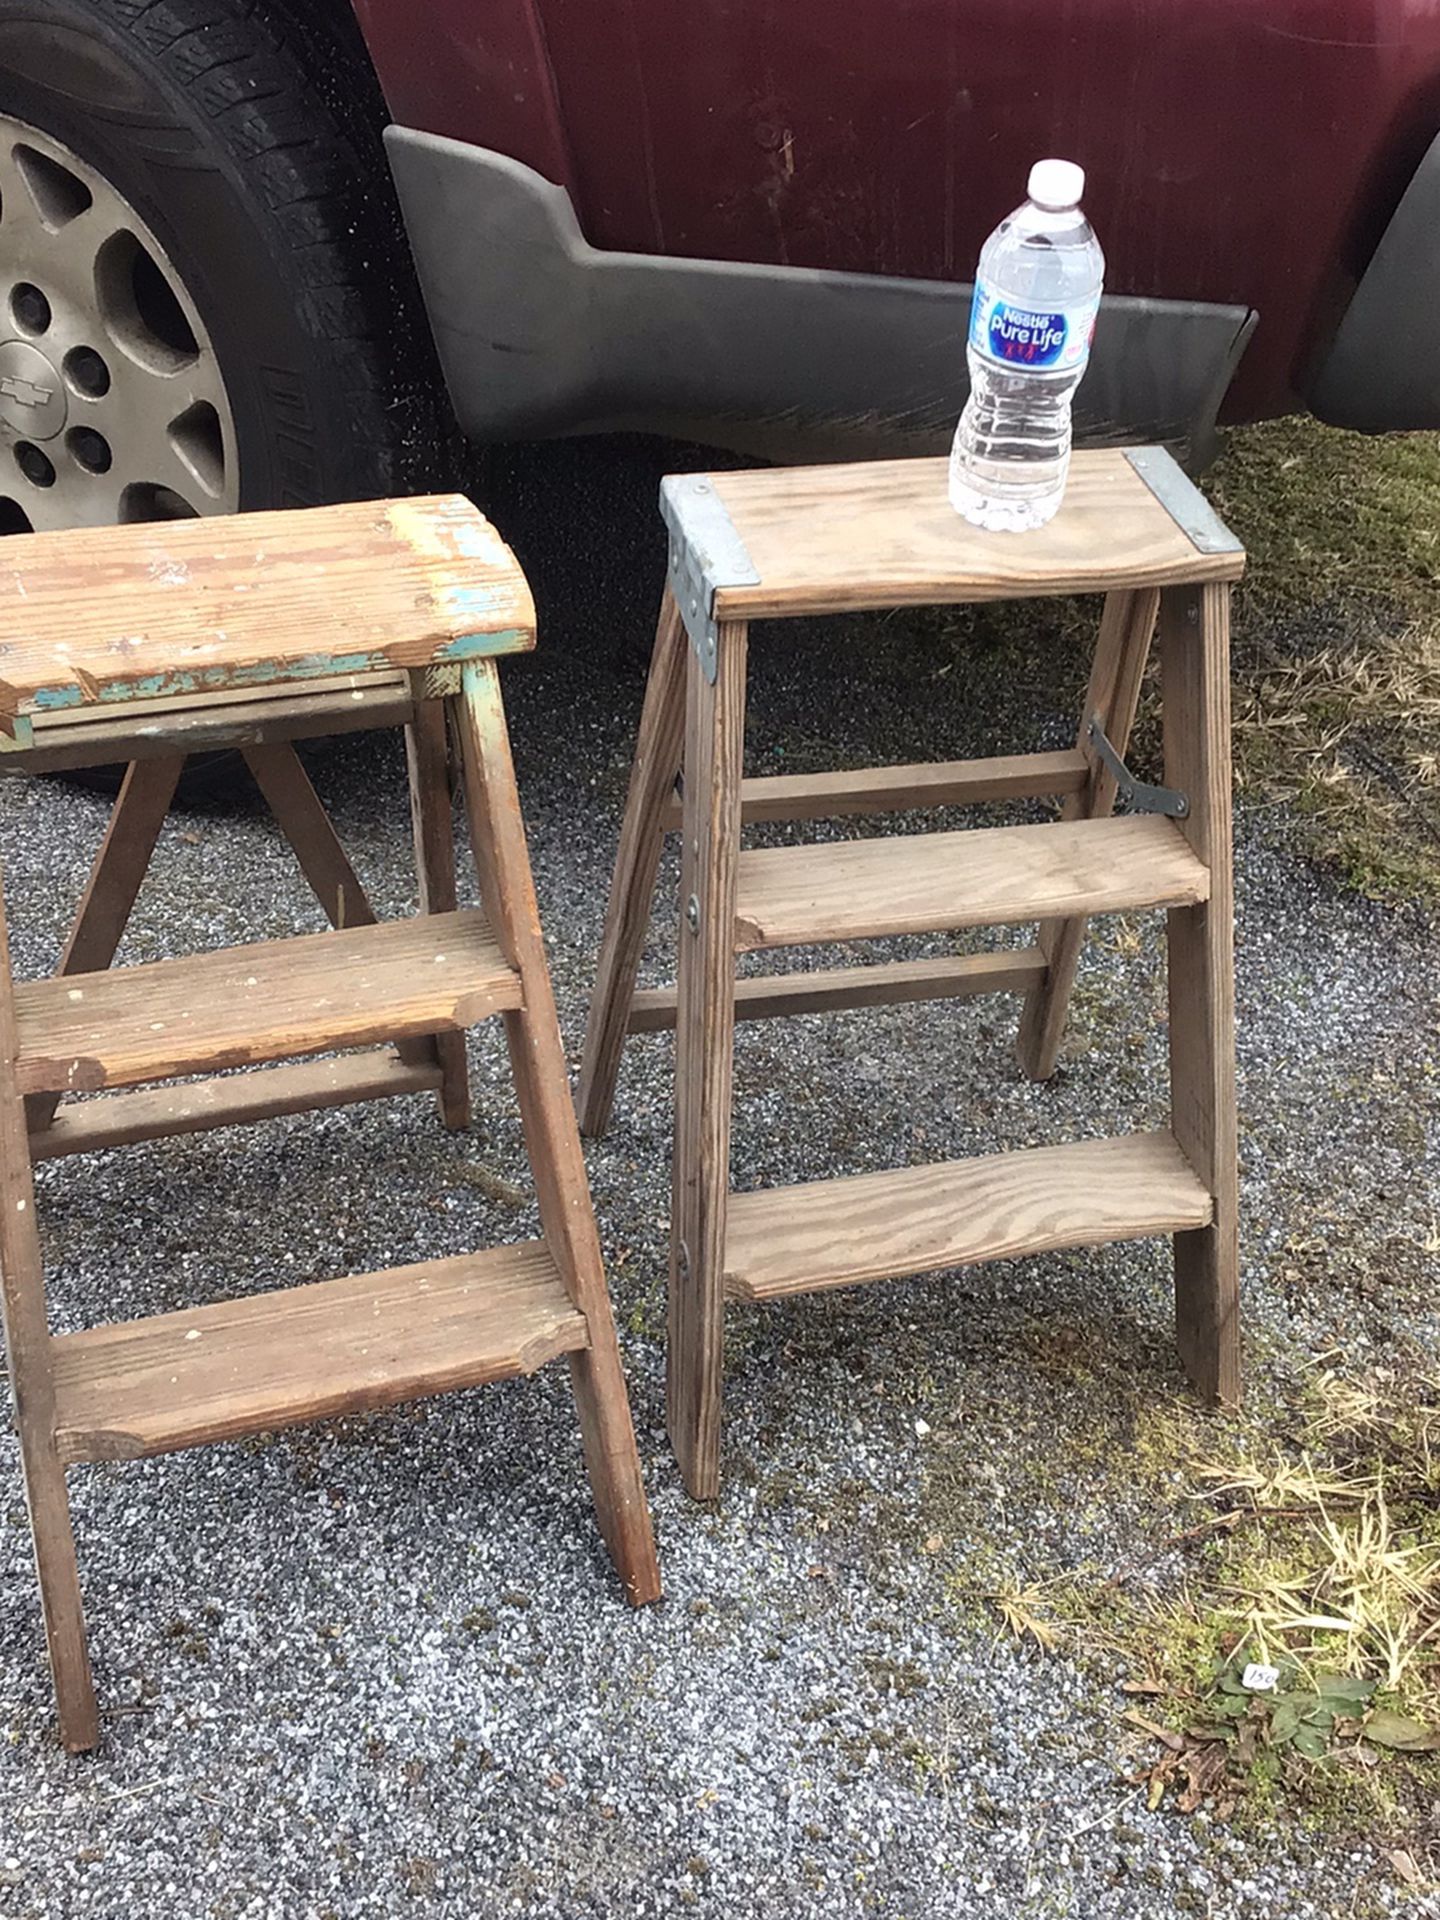 2 Wooden Ladders Vintage Shelf’s Step Stools Same Height 22 Inches High Farm House